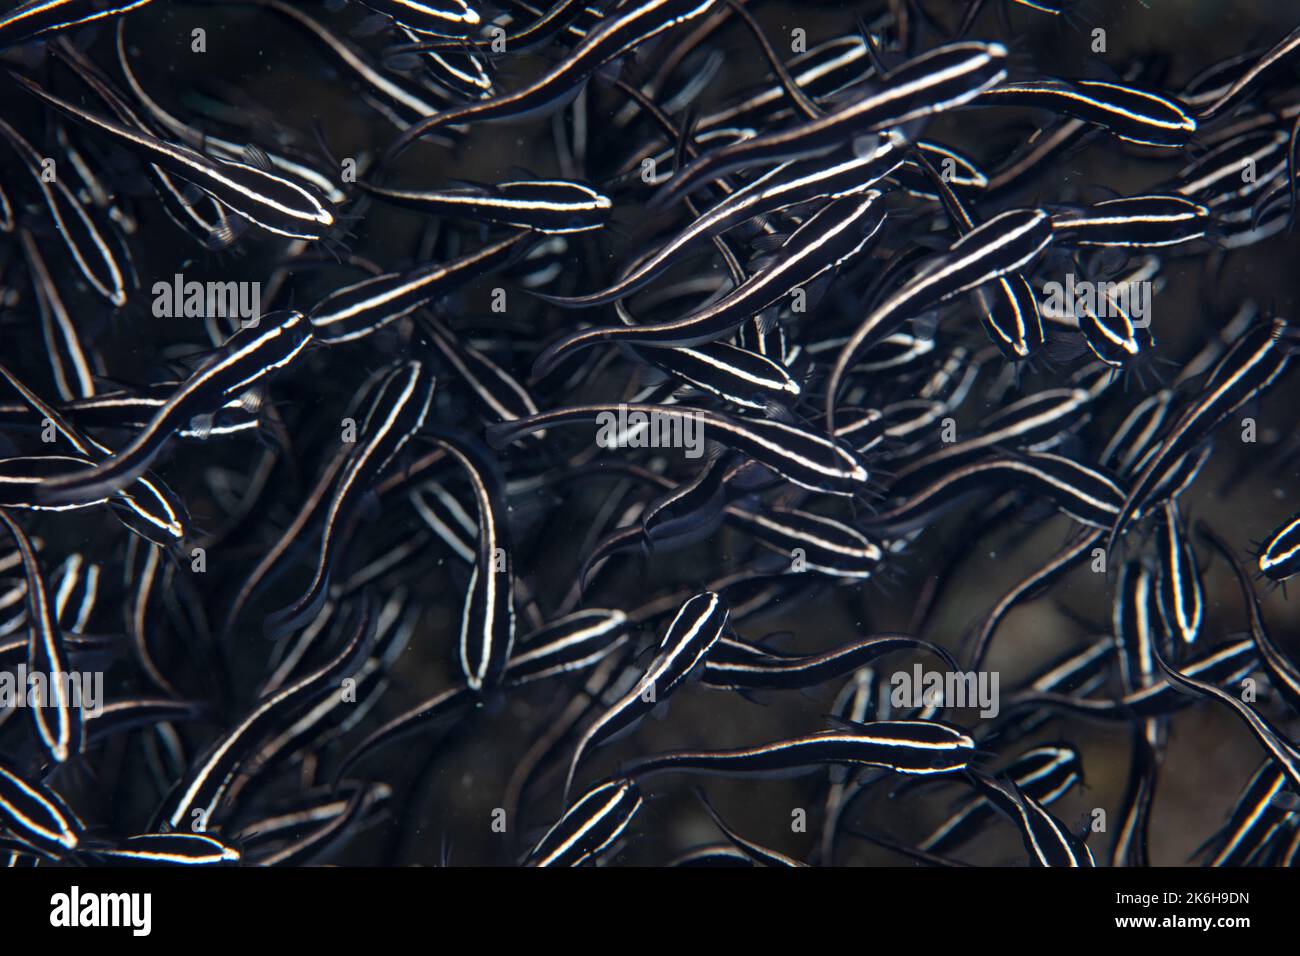 A school of young Striped eel catfish, Plotosus lineatus, swarm over the seafloor in Indonesia feeding on small invertebrates. Stock Photo